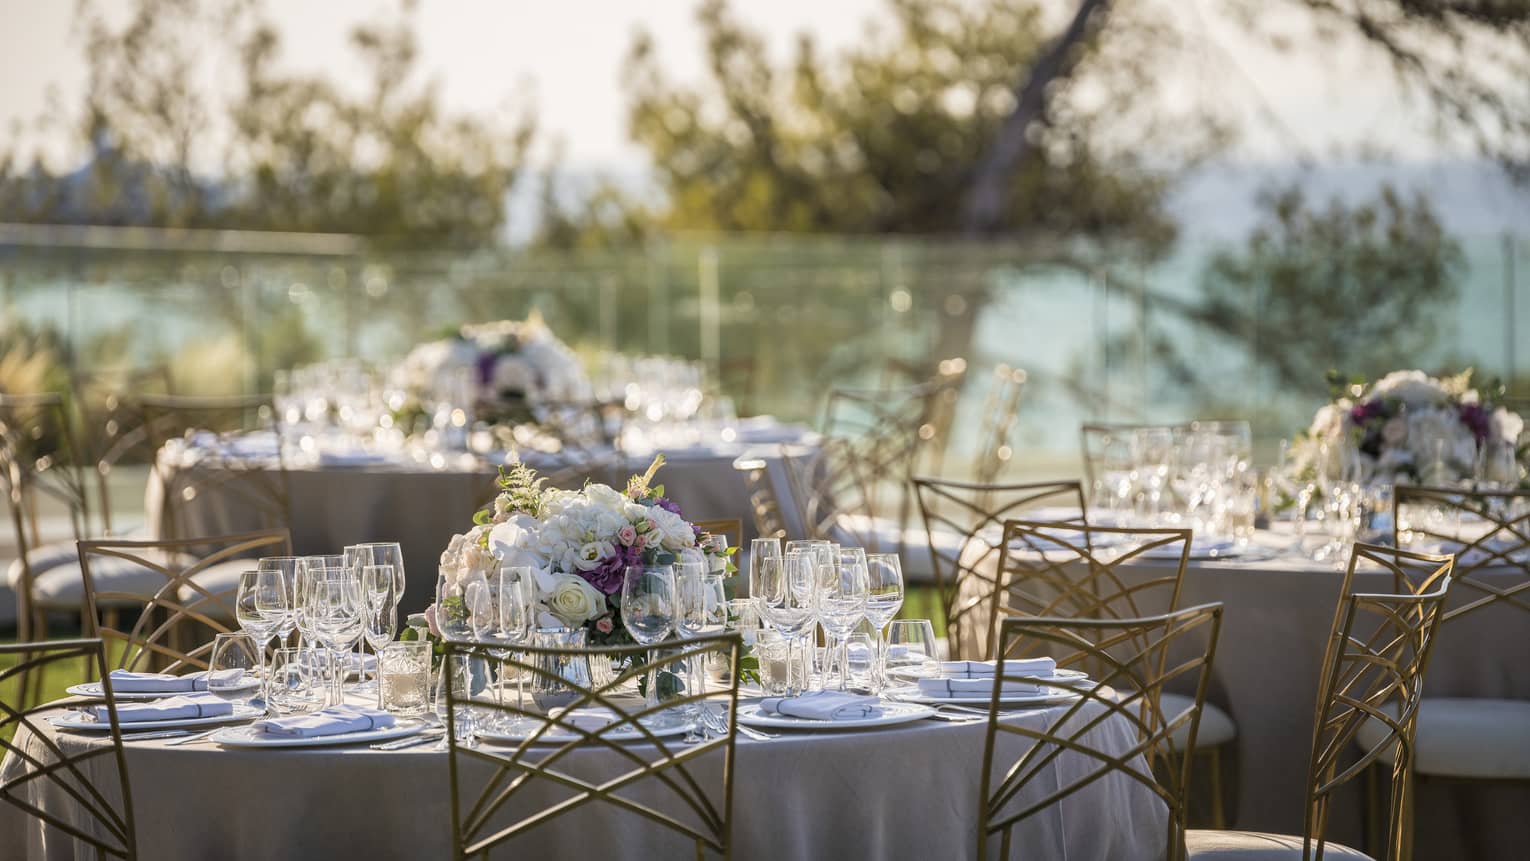 Romantic outdoor table setting with flowers, wine glasses and white linens overlooking trees and ocean